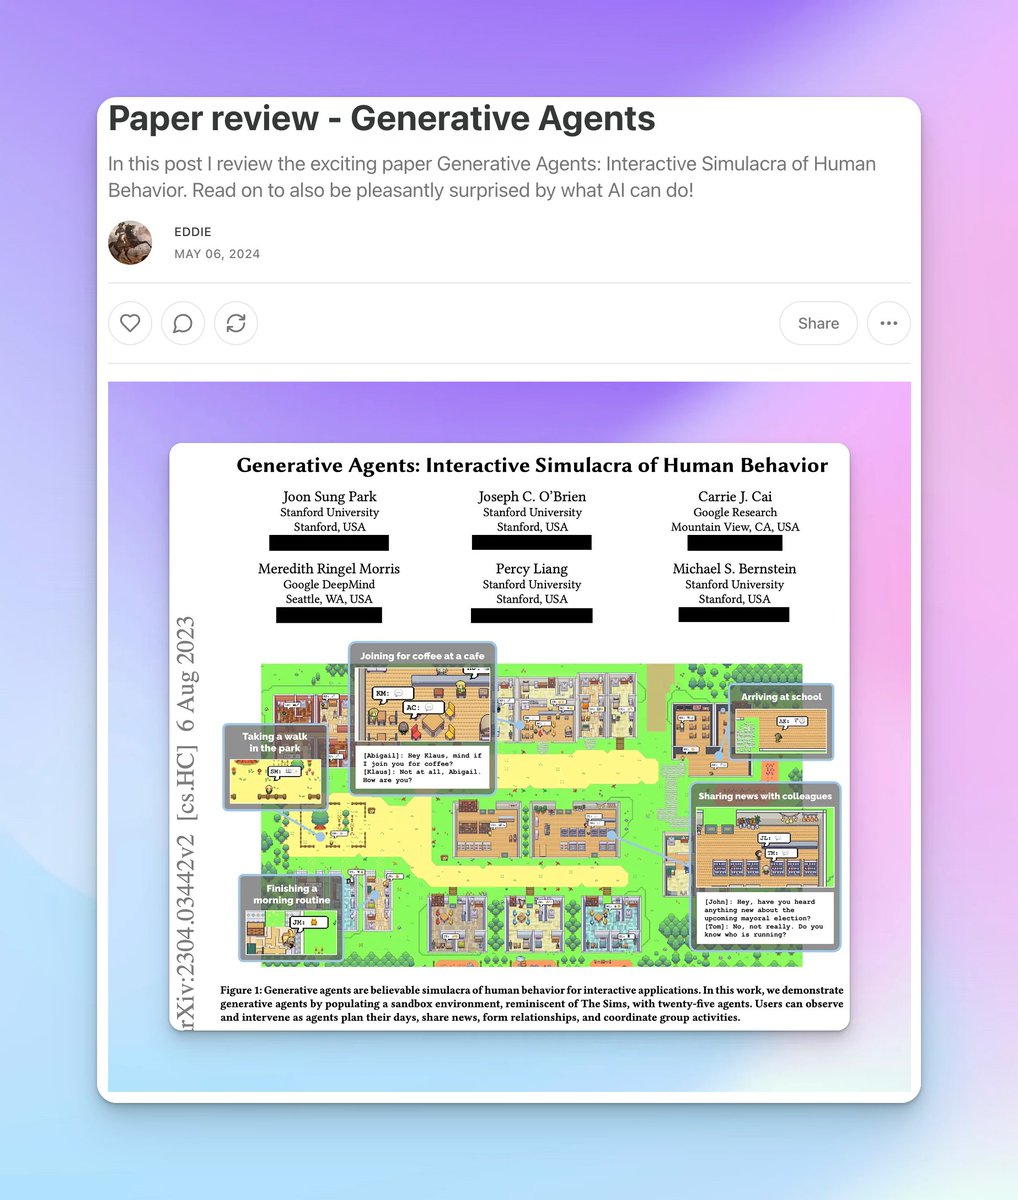 New blog post is out 🔥 In this latest post I review the paper 'Generative Agents' Hope you find it useful